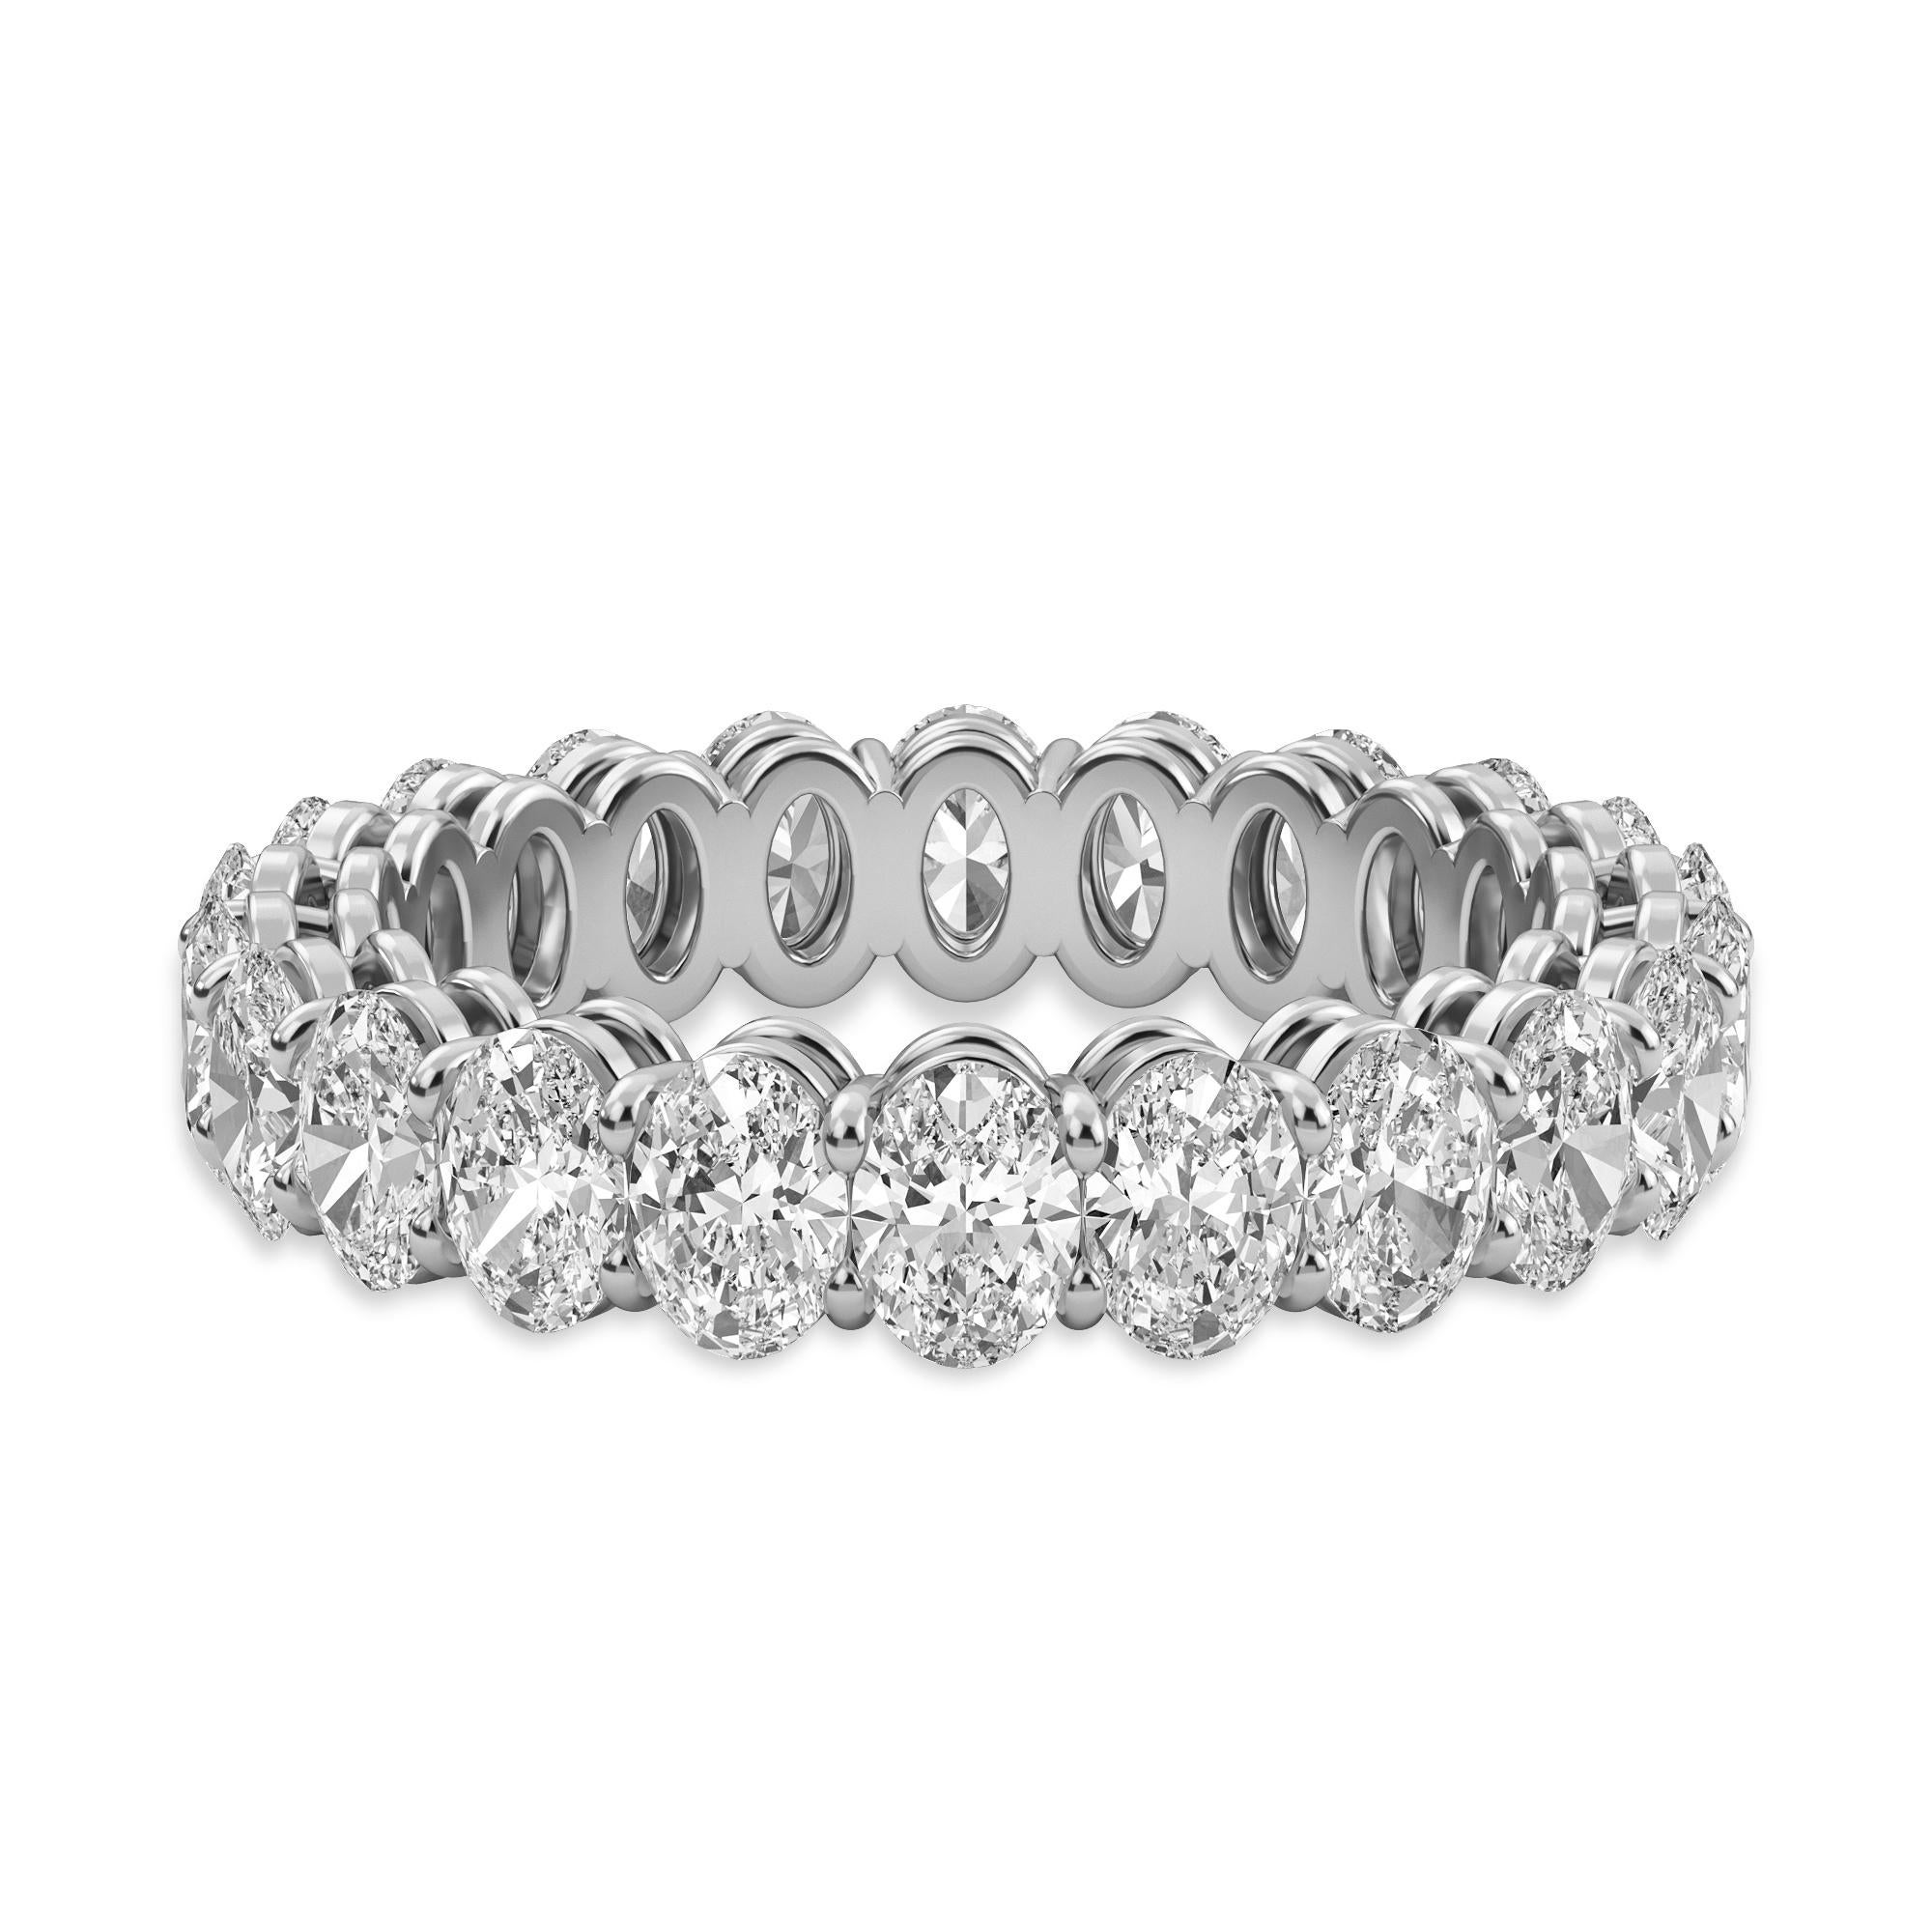 Imagine the look on her face when she sees this Oval Diamond Eternity Band; featuring 22 Oval Diamonds and weighing 3.45 Total Carat Weight. These diamonds are F Color, VS-SI Clarity, and are set in a Platinum setting in a finger size 6.5. 

Need a